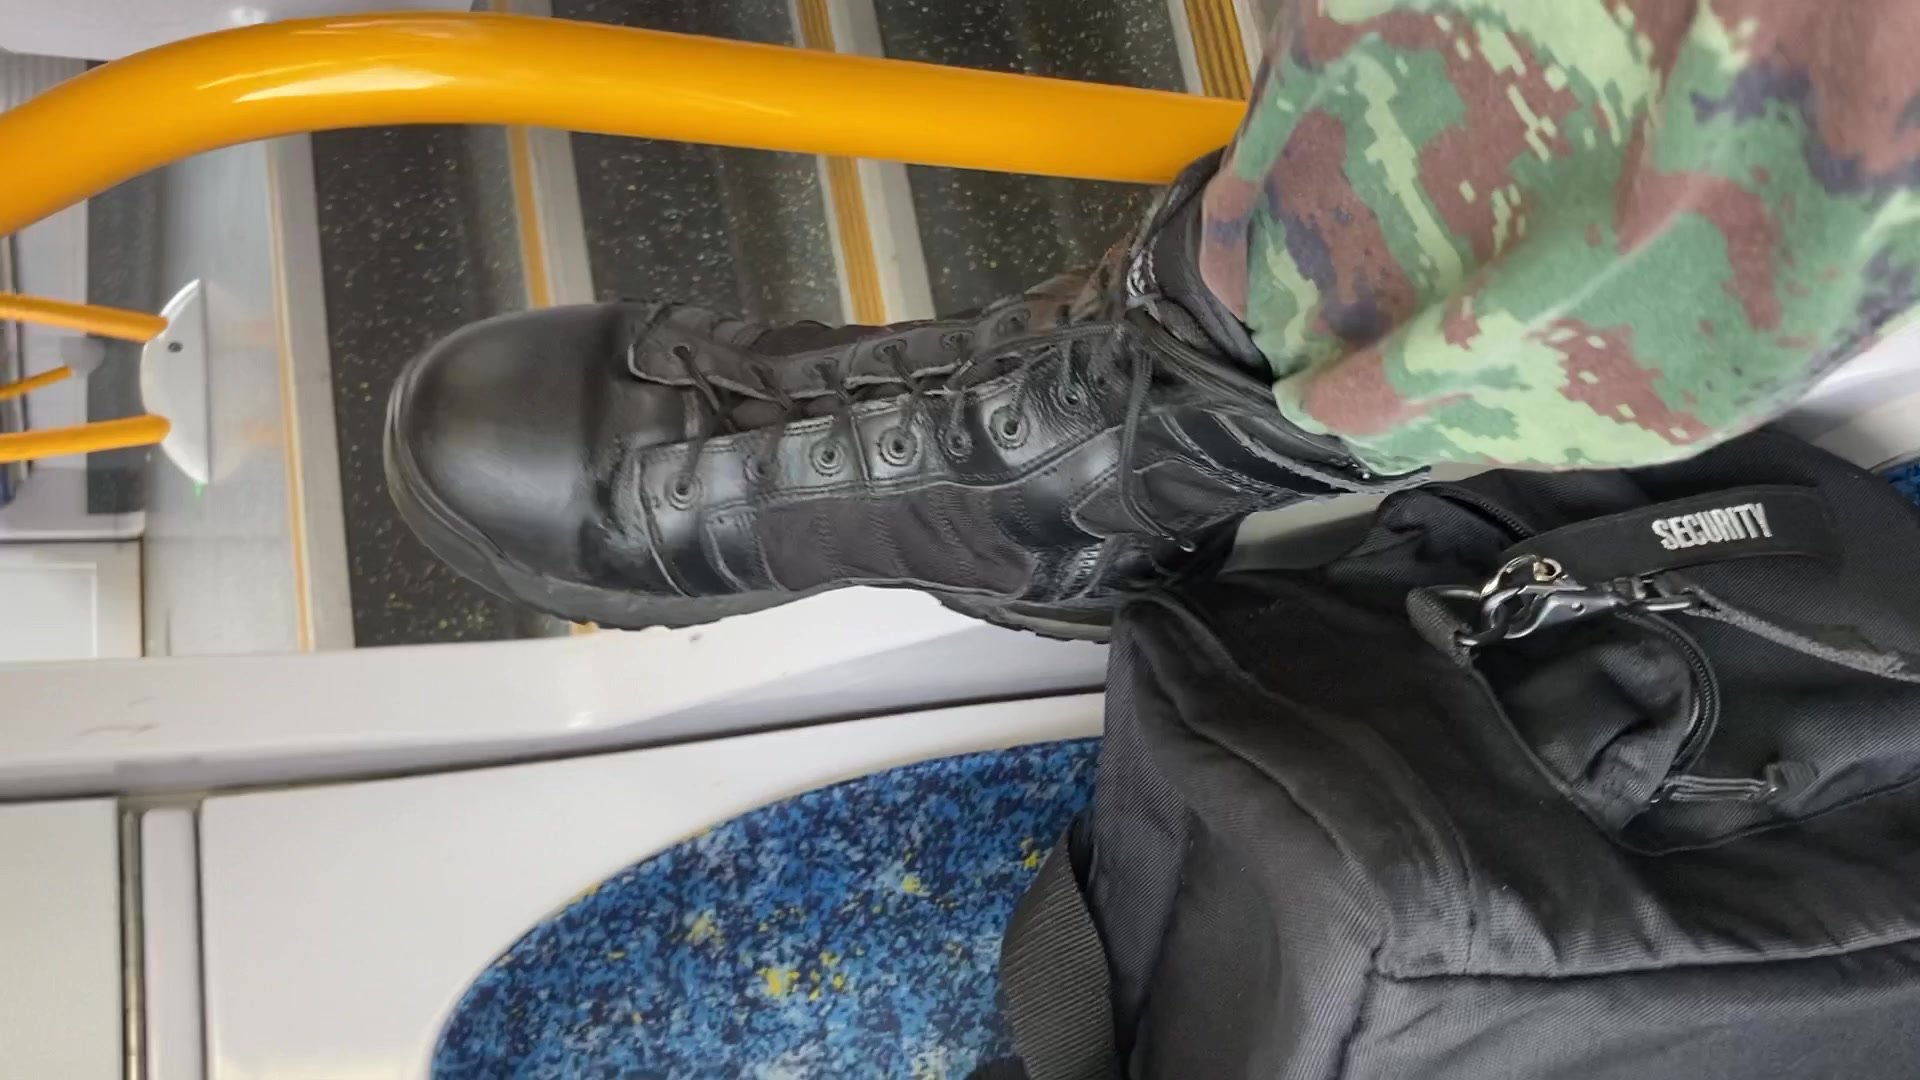 Wearing boots on the train.